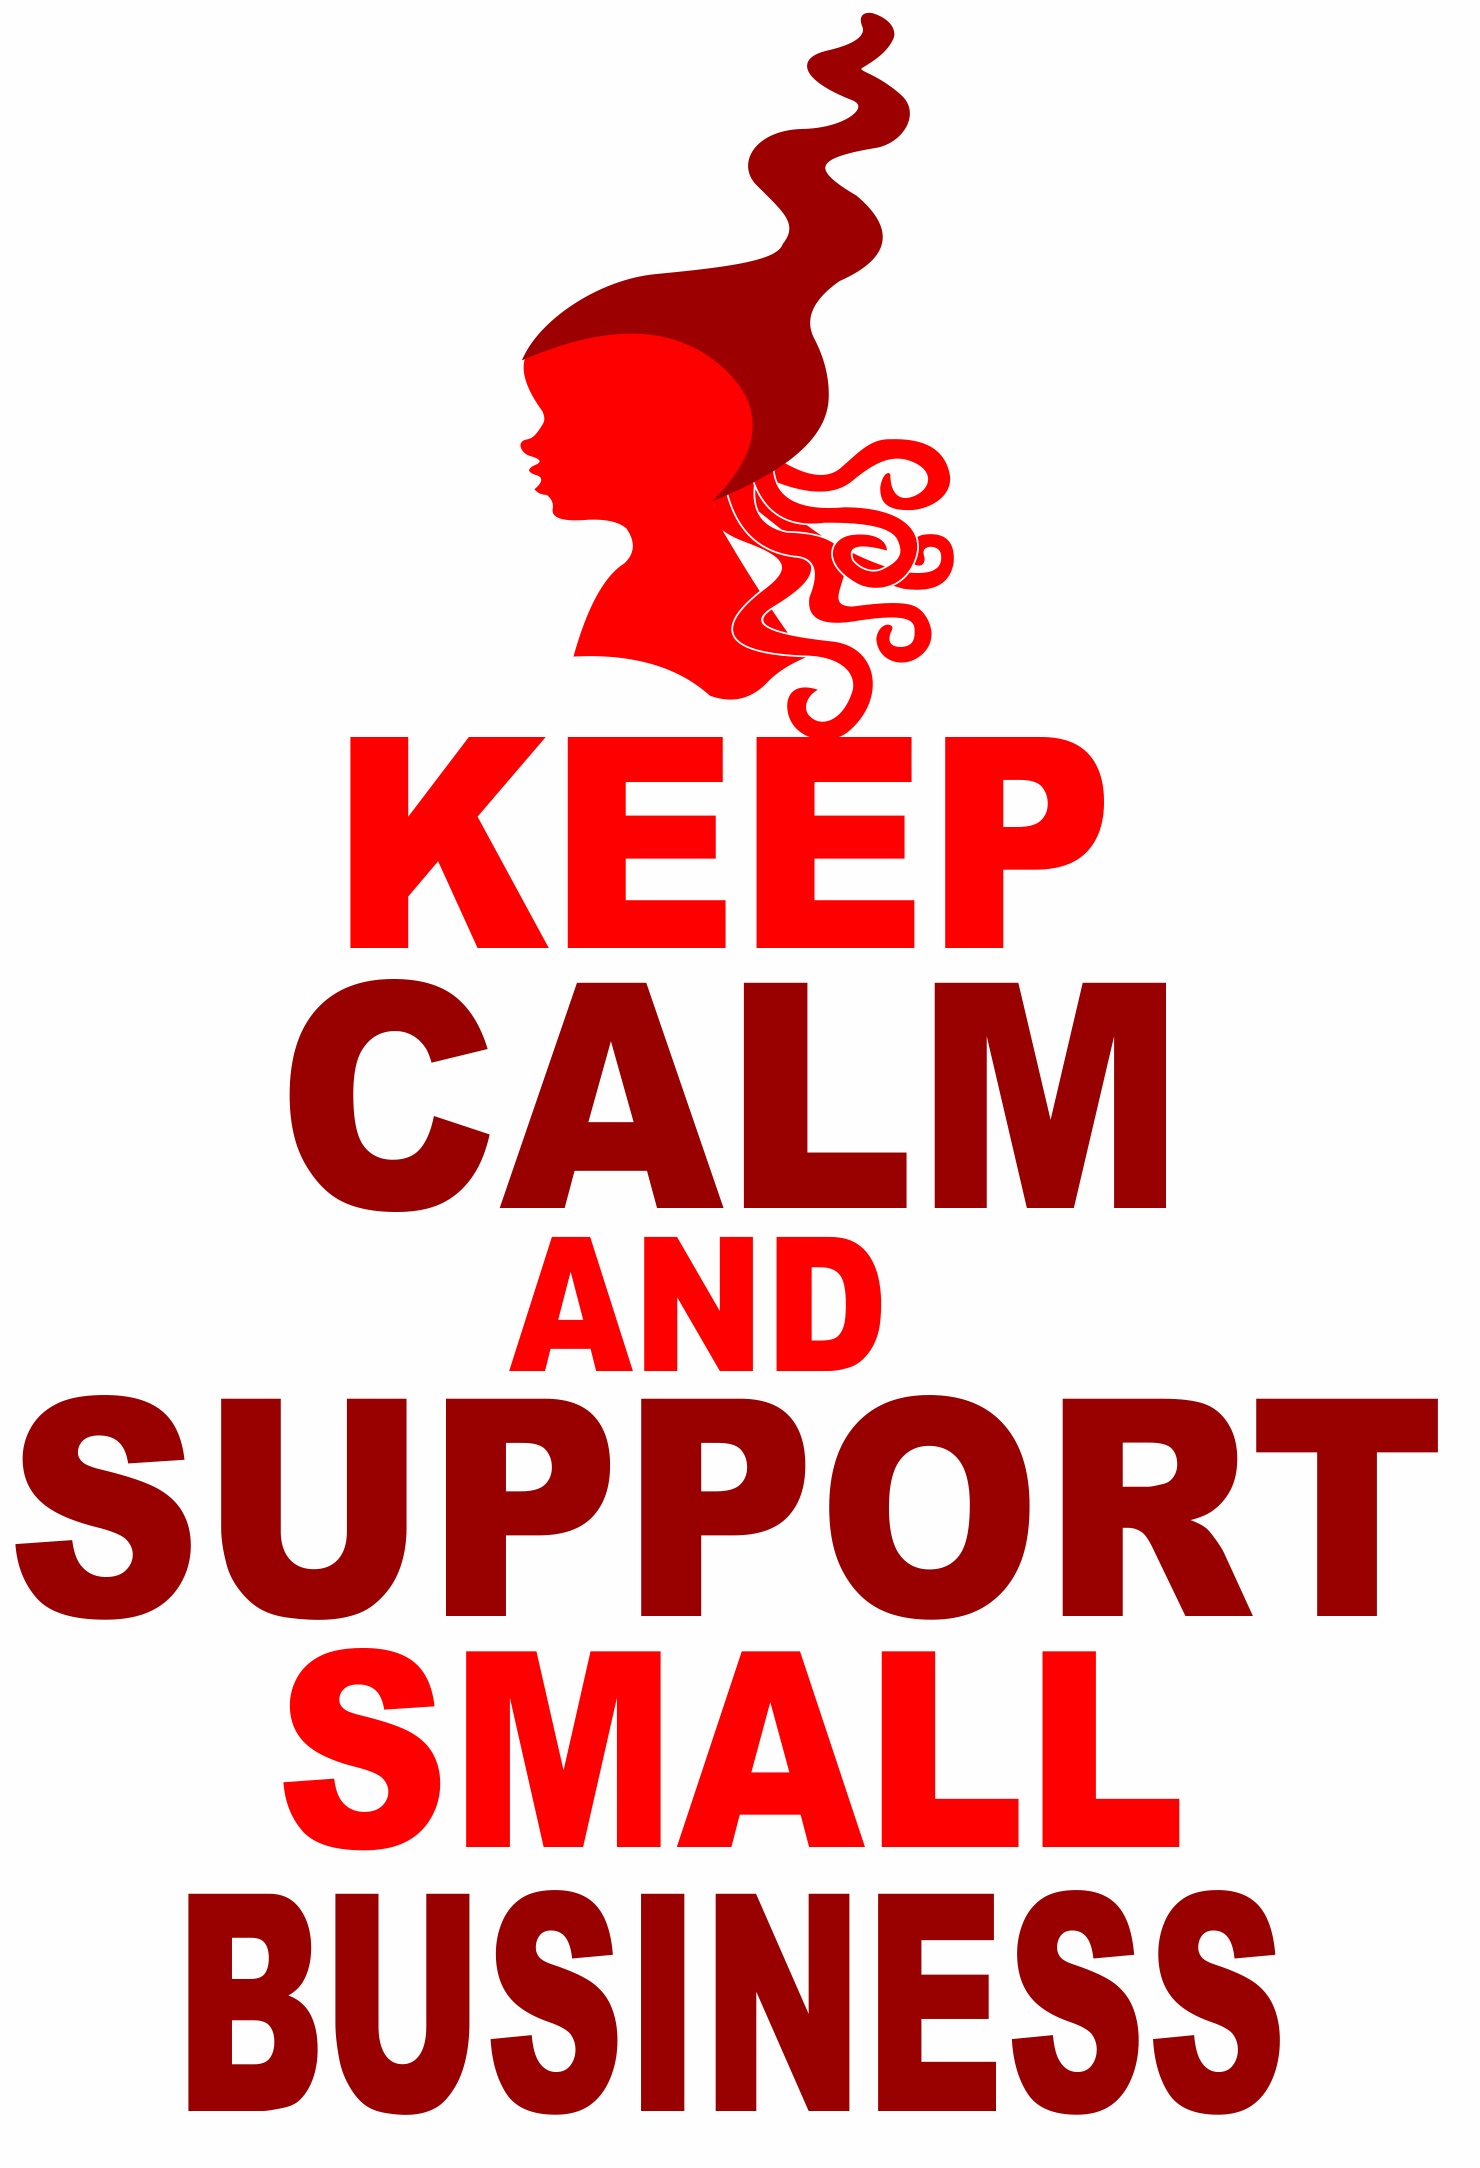 ♥SUPPORT SMALL BUSINESS♥ 1€-SPARbie PLOTTFILE